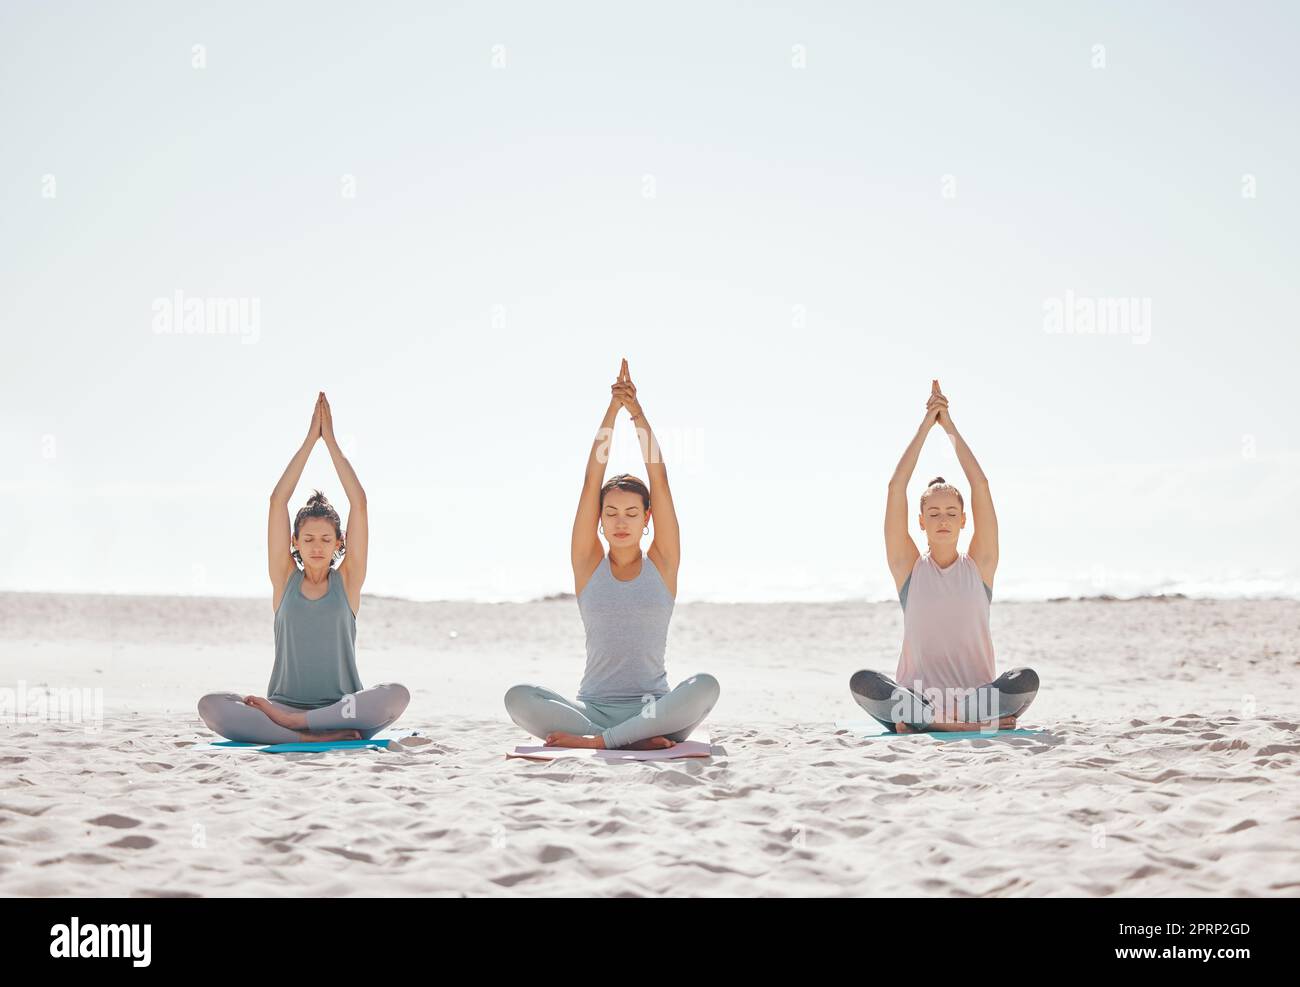 Zen, meditation and yoga at the beach with women for wellness, fitness and health. Stretching, lotus pose and friends doing a pilates workout or exercise for mobility, flexibility or mindfulness. Stock Photo